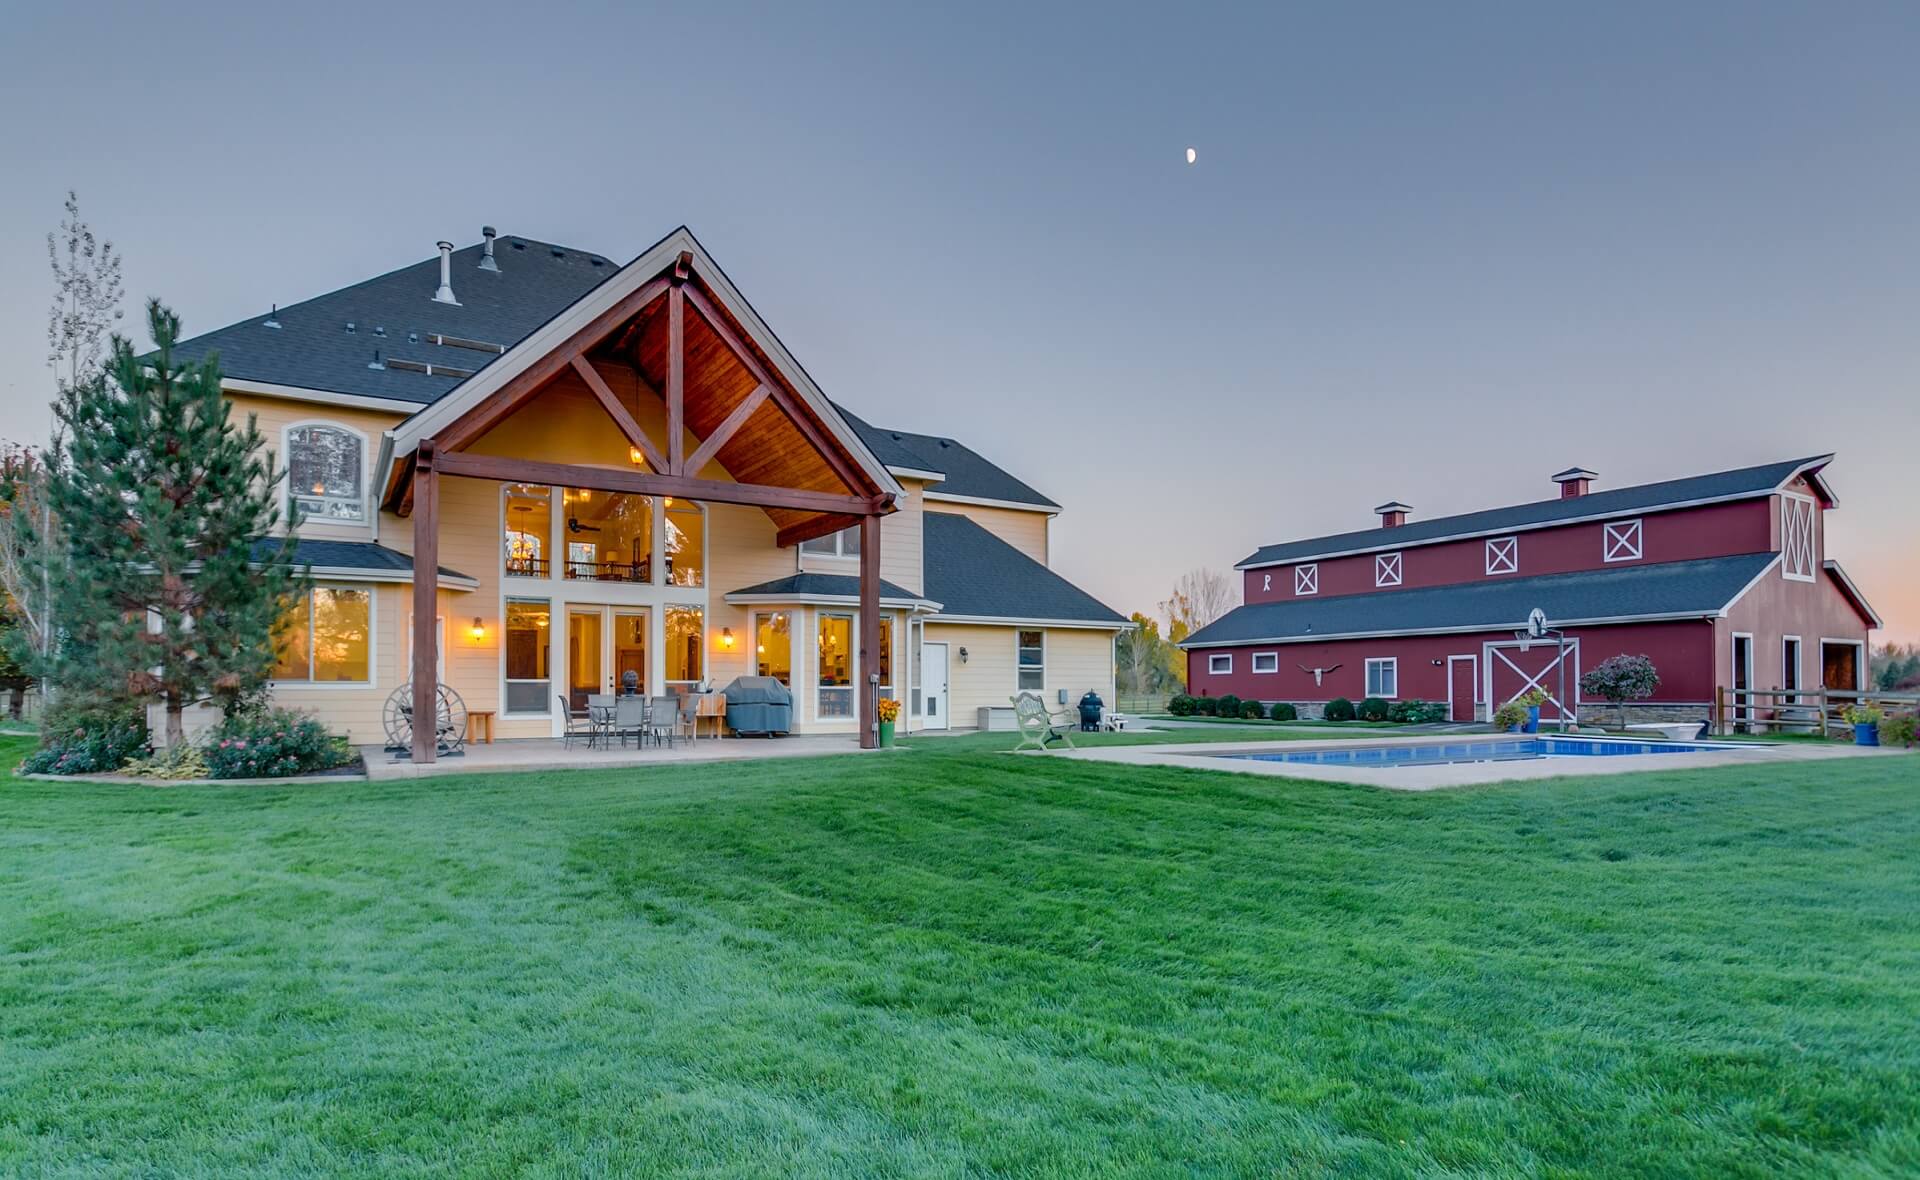 Luxury home by Boise river with massive red barn and in ground pool